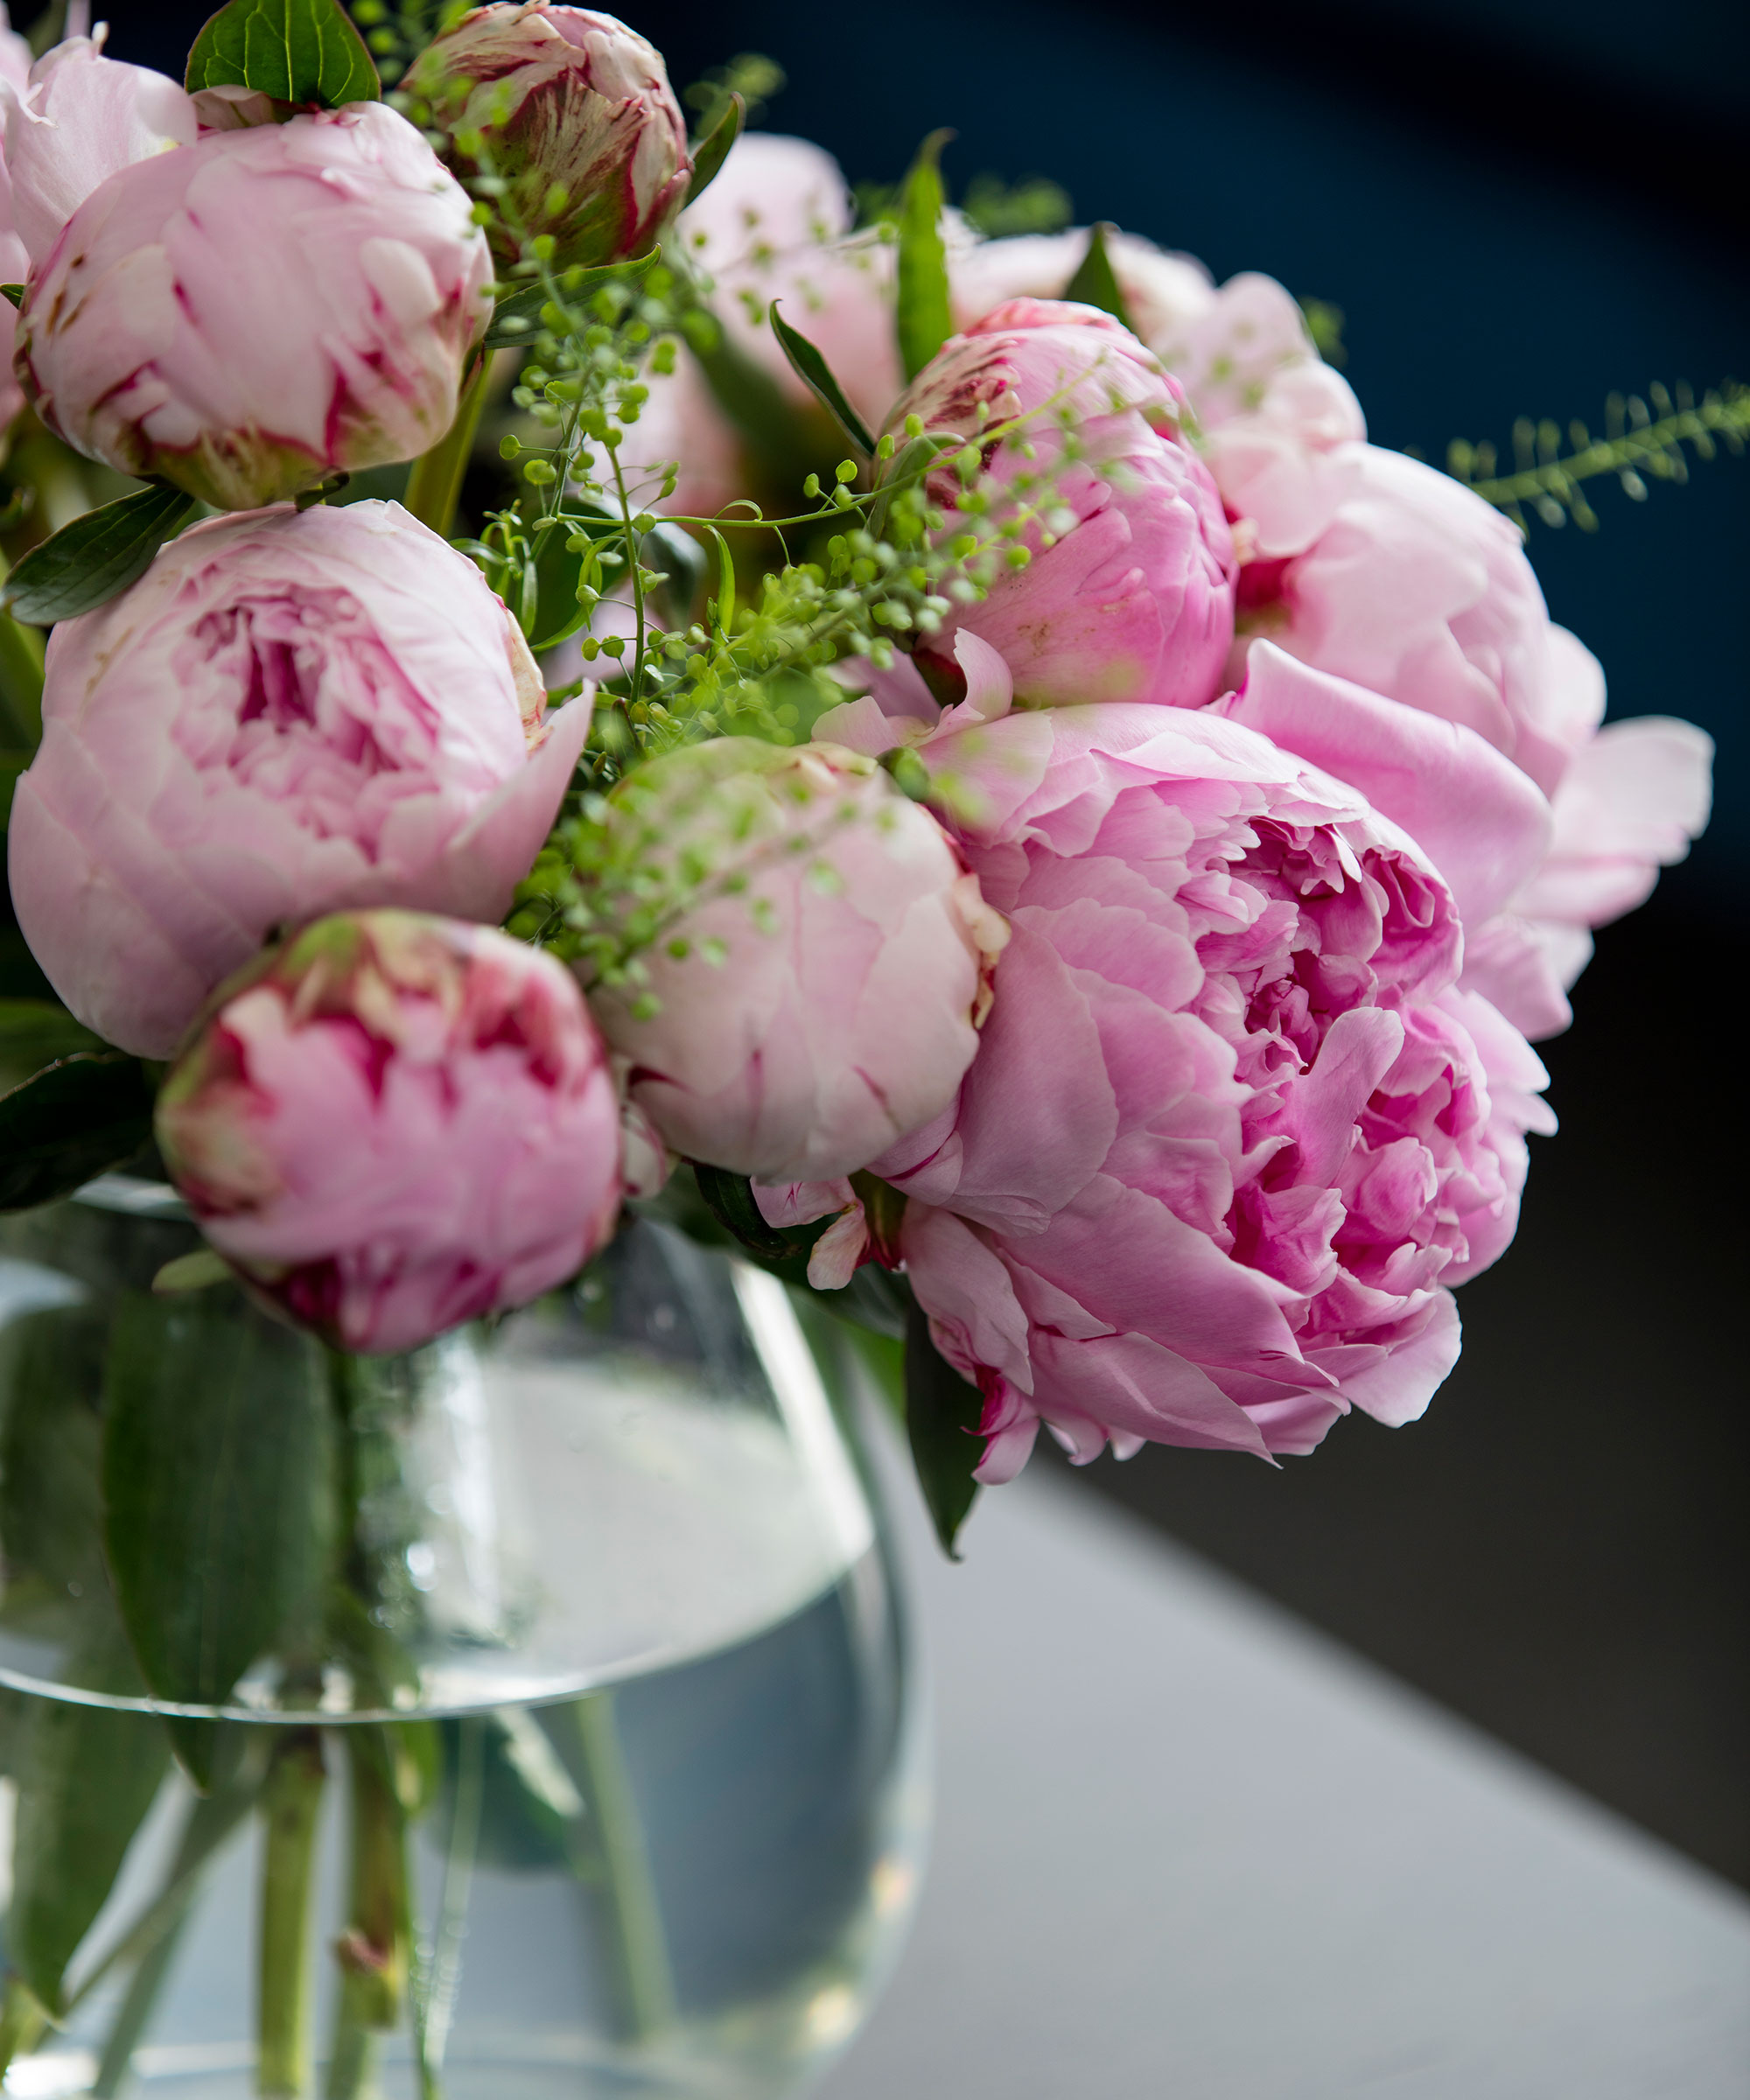 vase filled with peonies